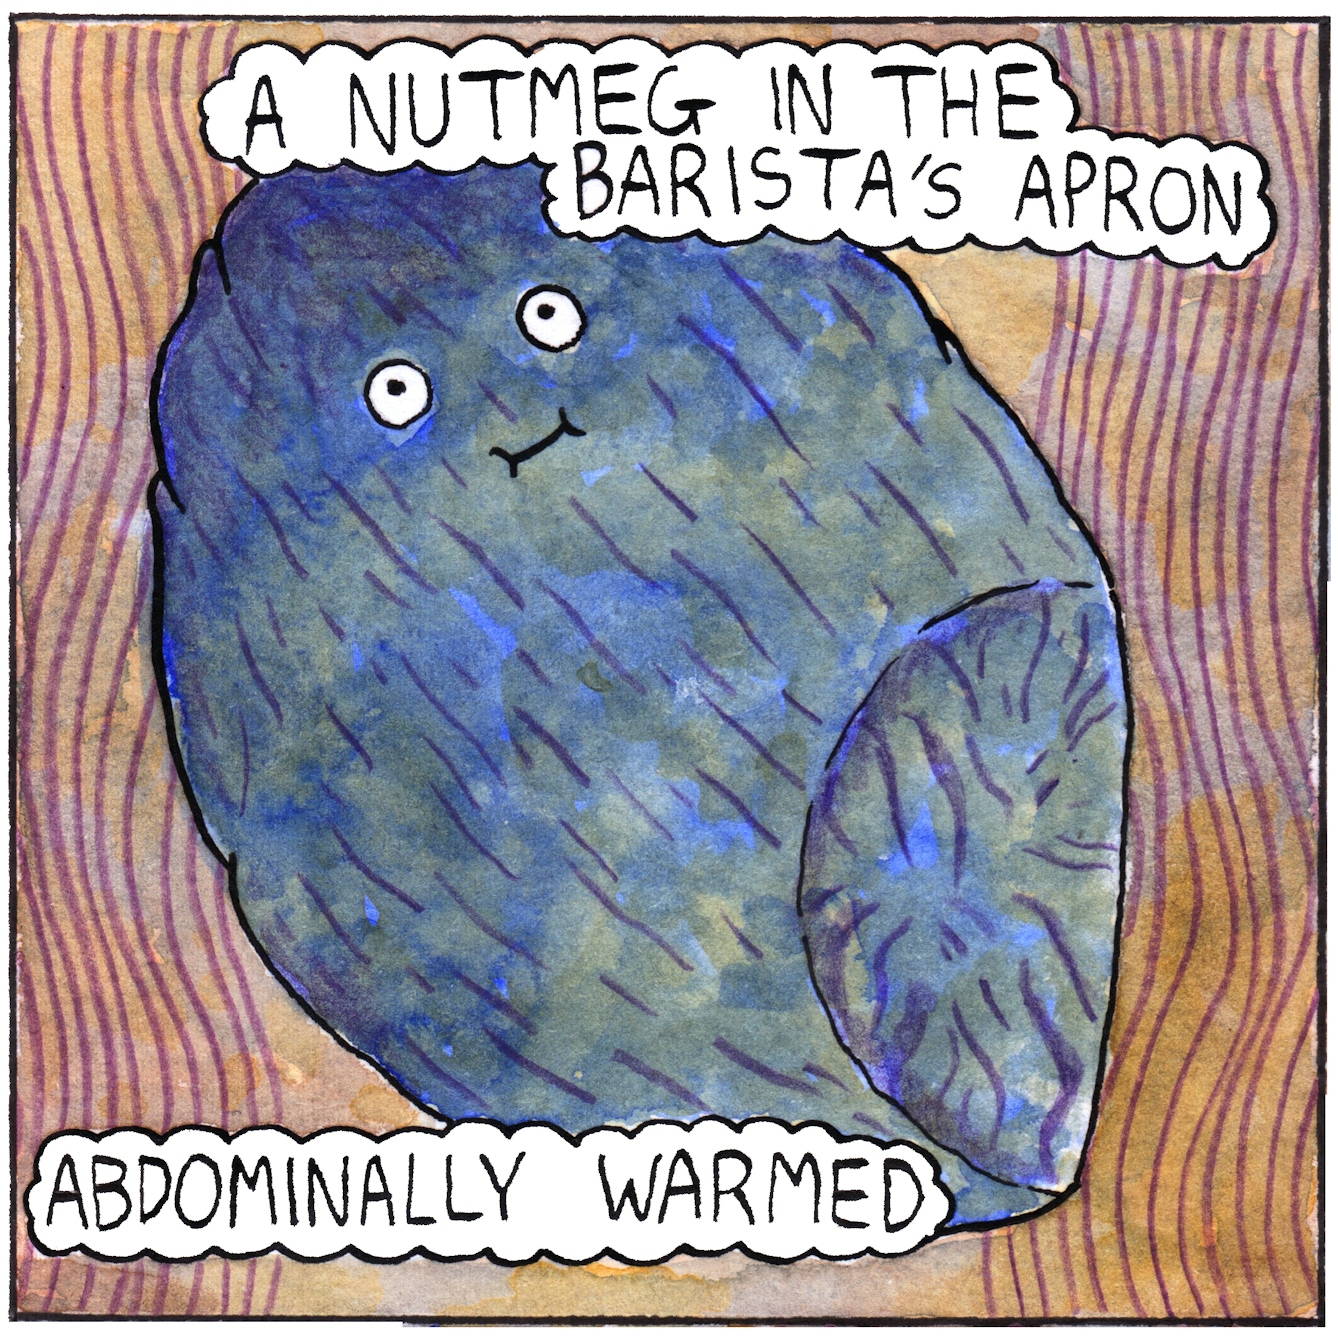 Panel 1 of the web comic 'Nutmeg': A blue, brown and purple nutmeg fills most of the panel. It has eyes and a mouth. It is cute, wide-eyed and smiling, looking upward. It shows signs of having been grated in the past. The background is brown, ocre and blue with purple wavy lines. Text bubbles read “A nutmeg in the barista’s apron. Abdominally warmed”. 